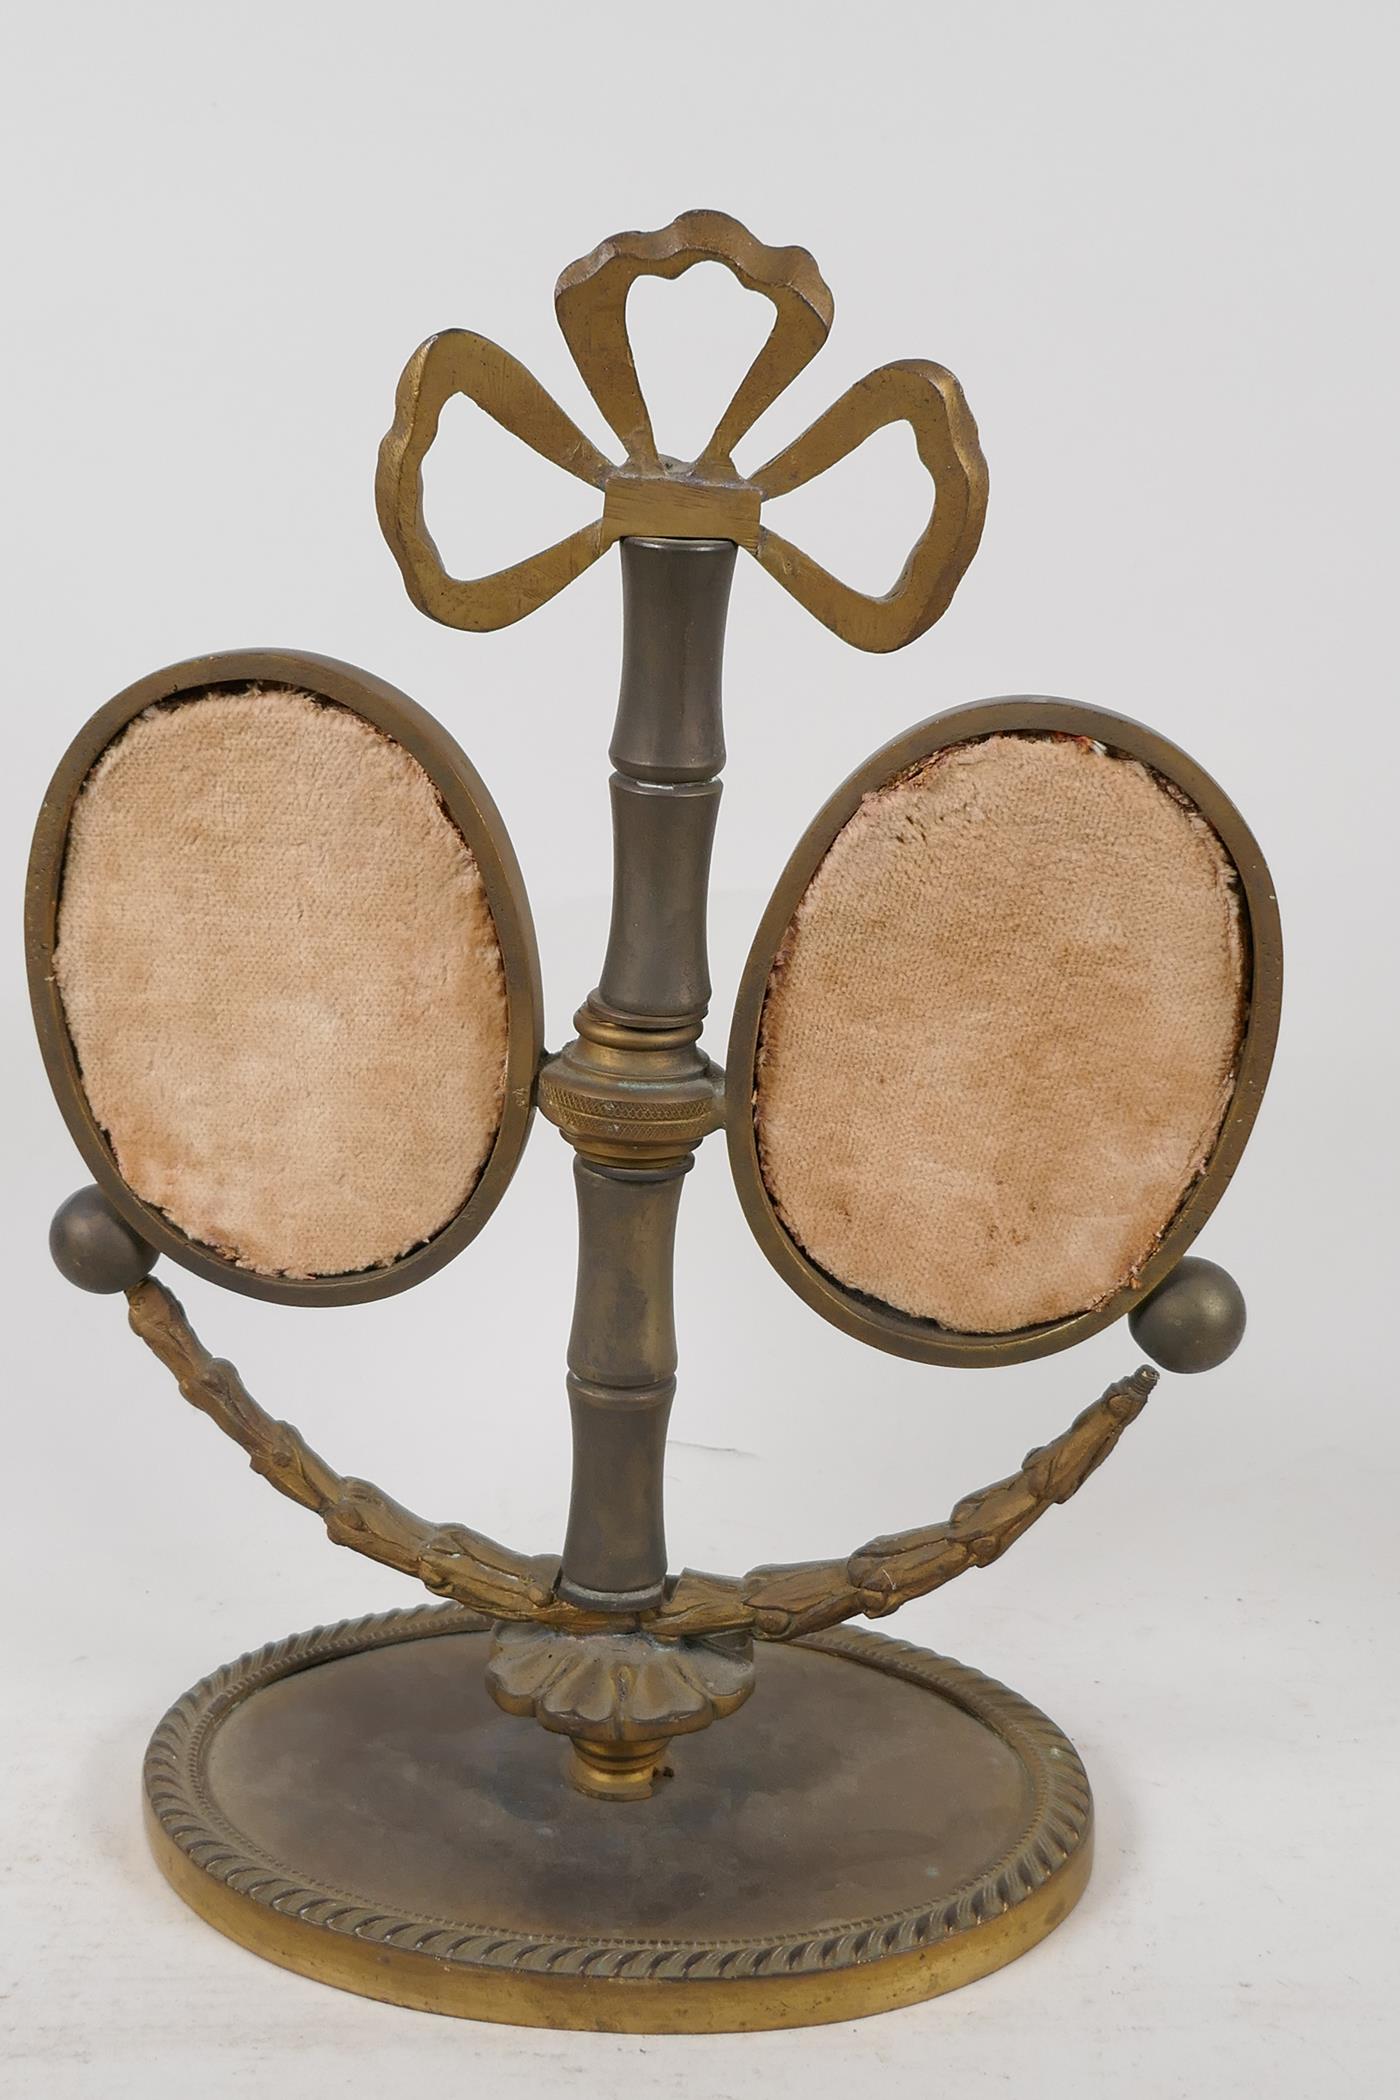 A C19th cast brass double photograph frame, 11" high - Image 4 of 4